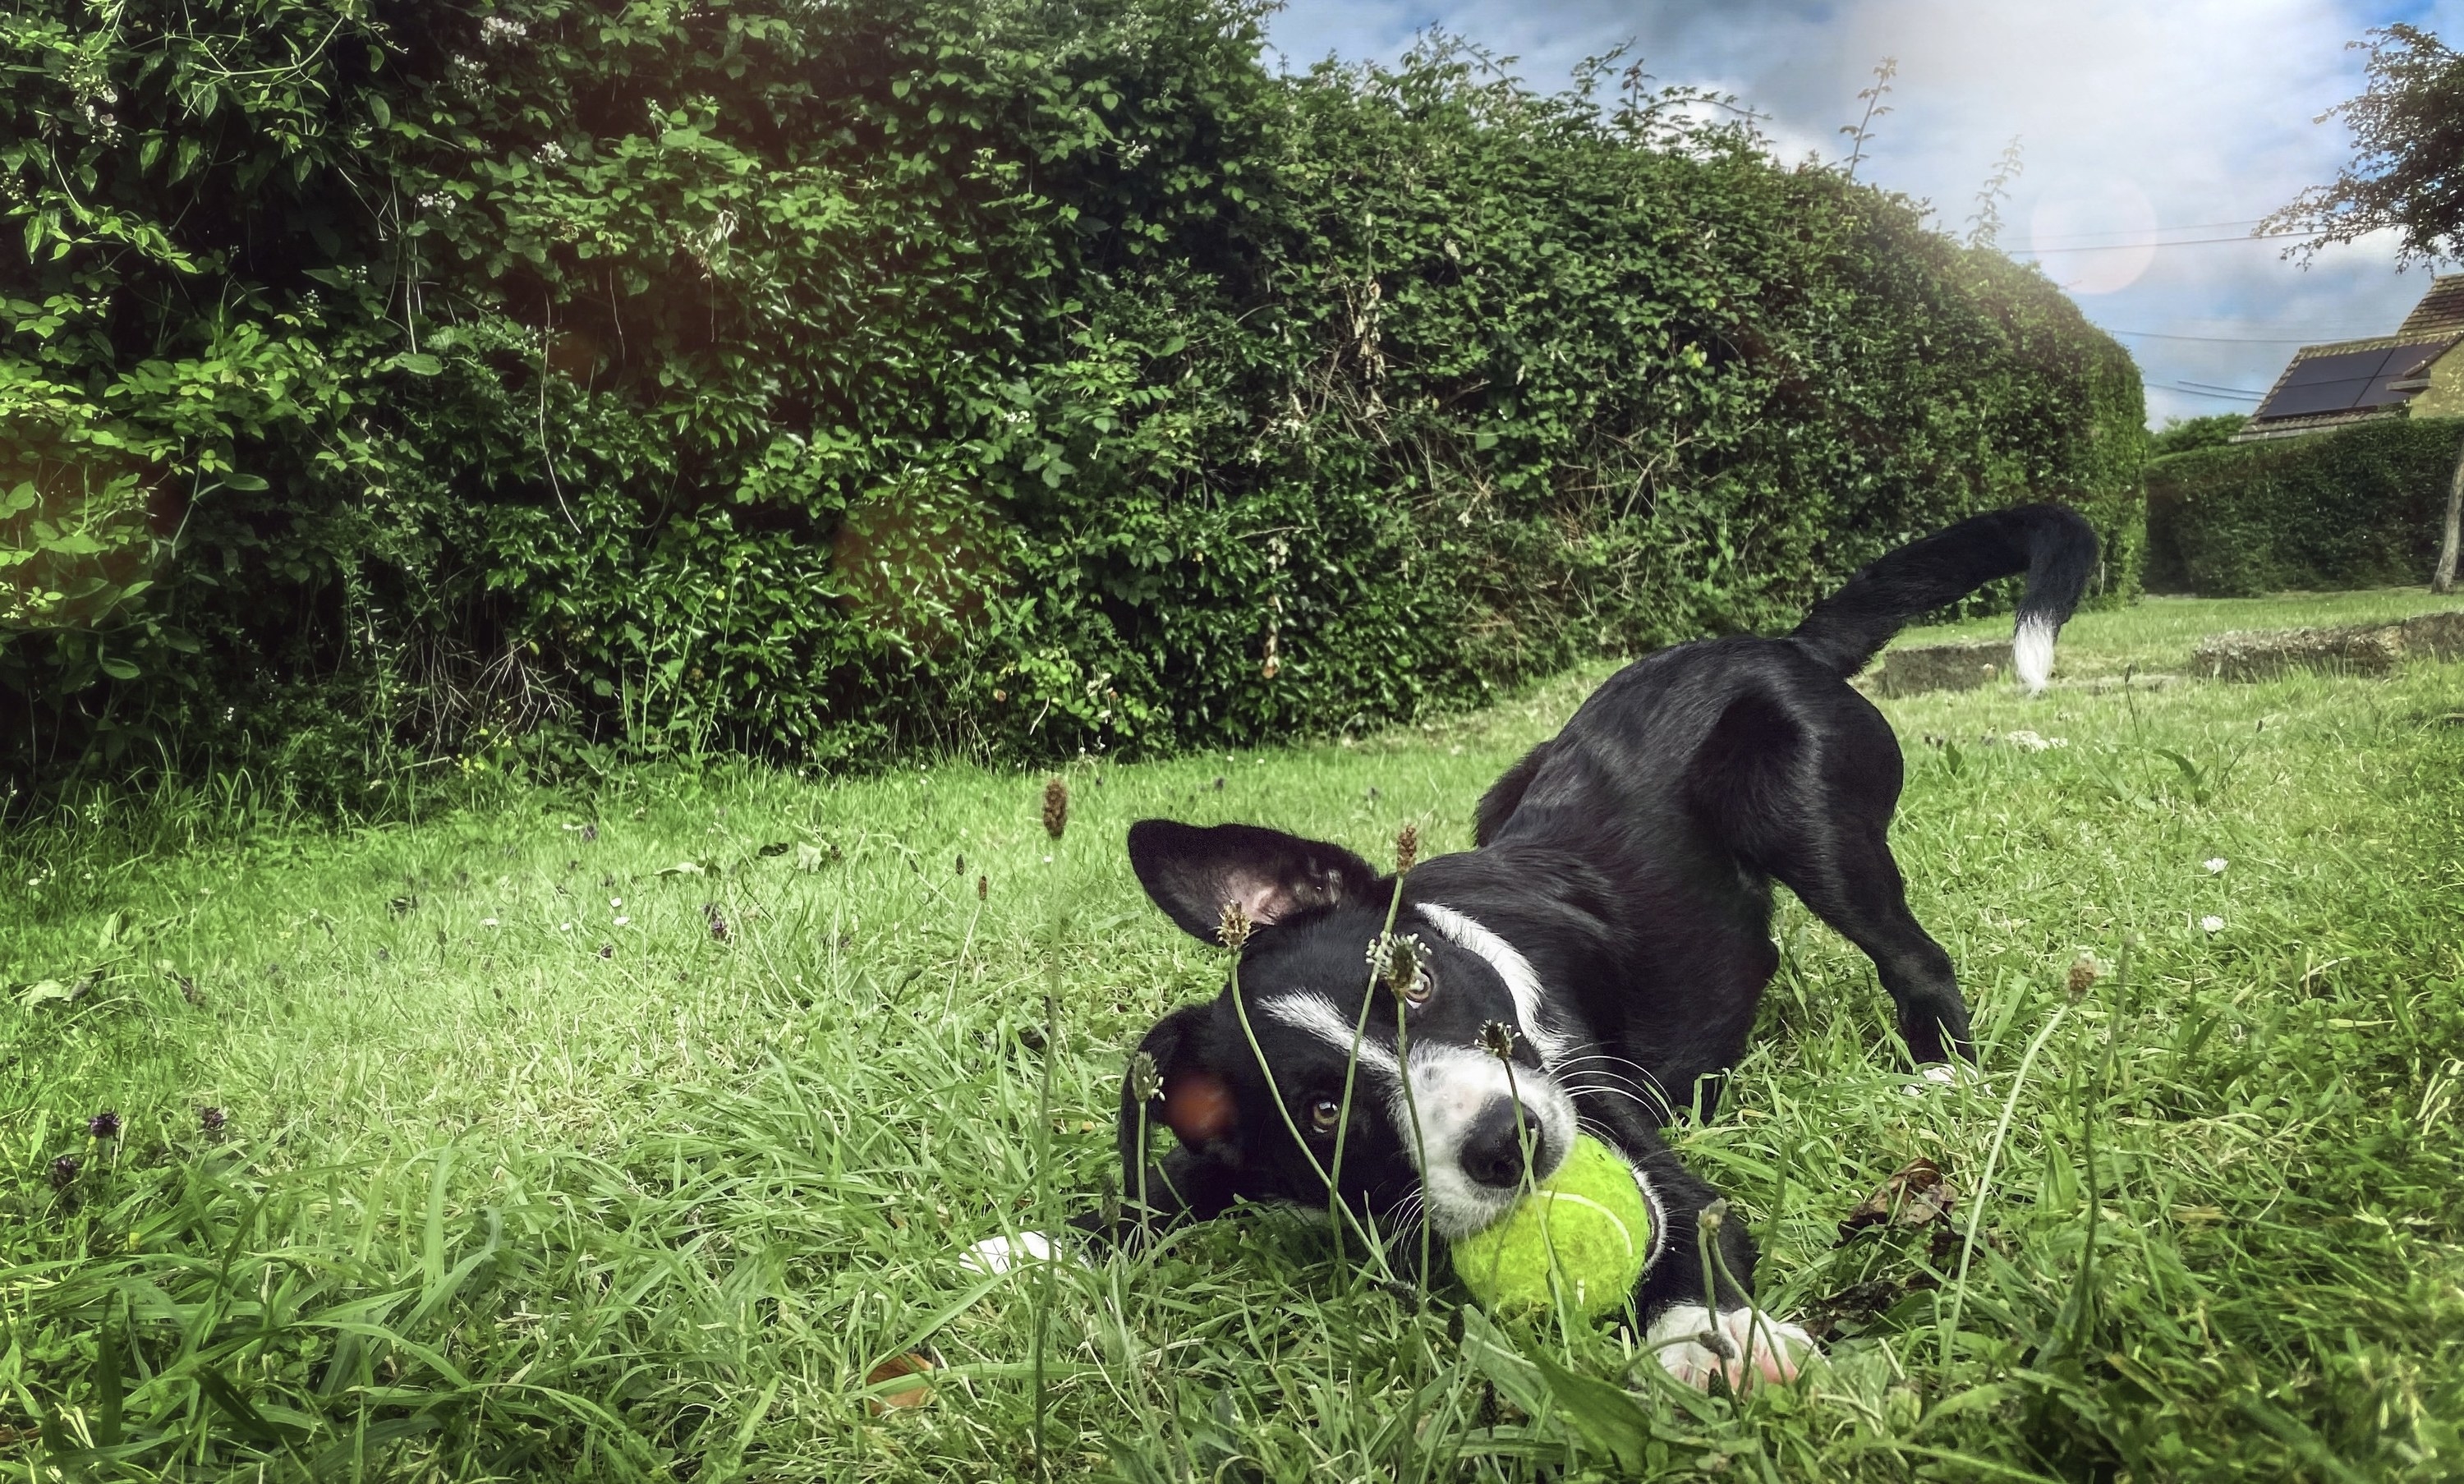 A border collie is playing with a tennis ball in the grass